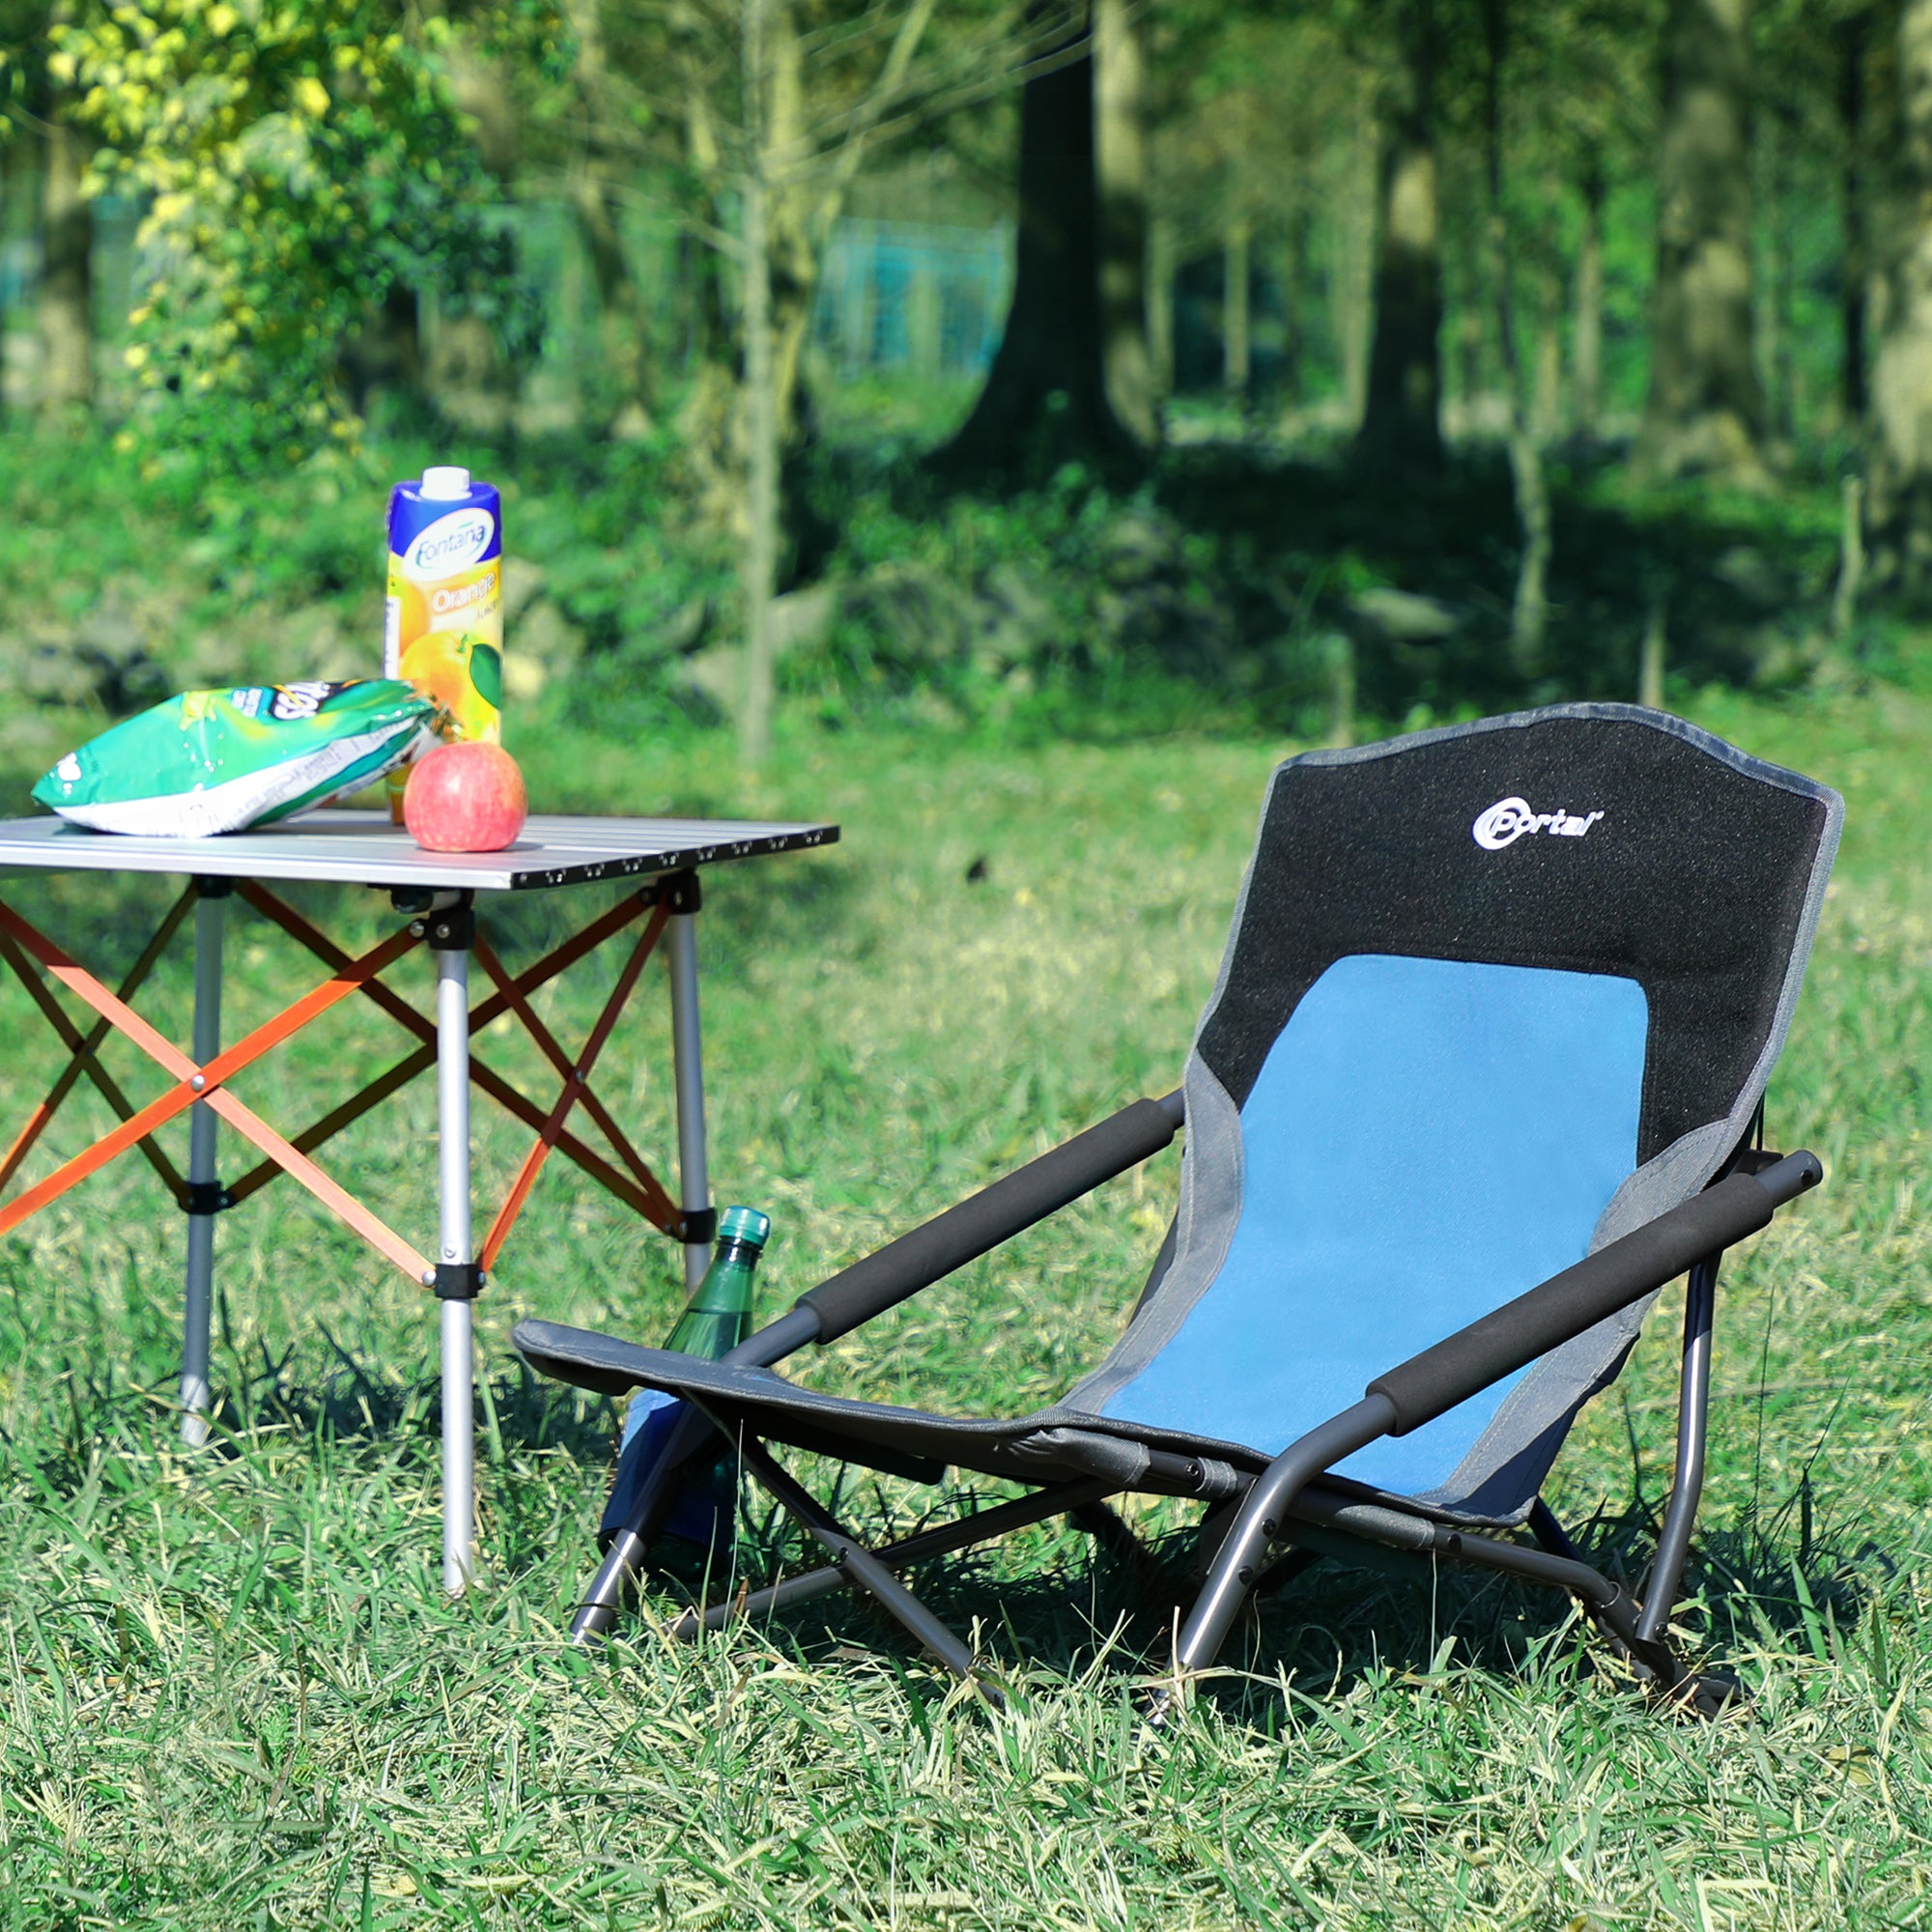 Small Folding Chair Kids Lawn Chair Portable Compact Outdoor Camping Chair